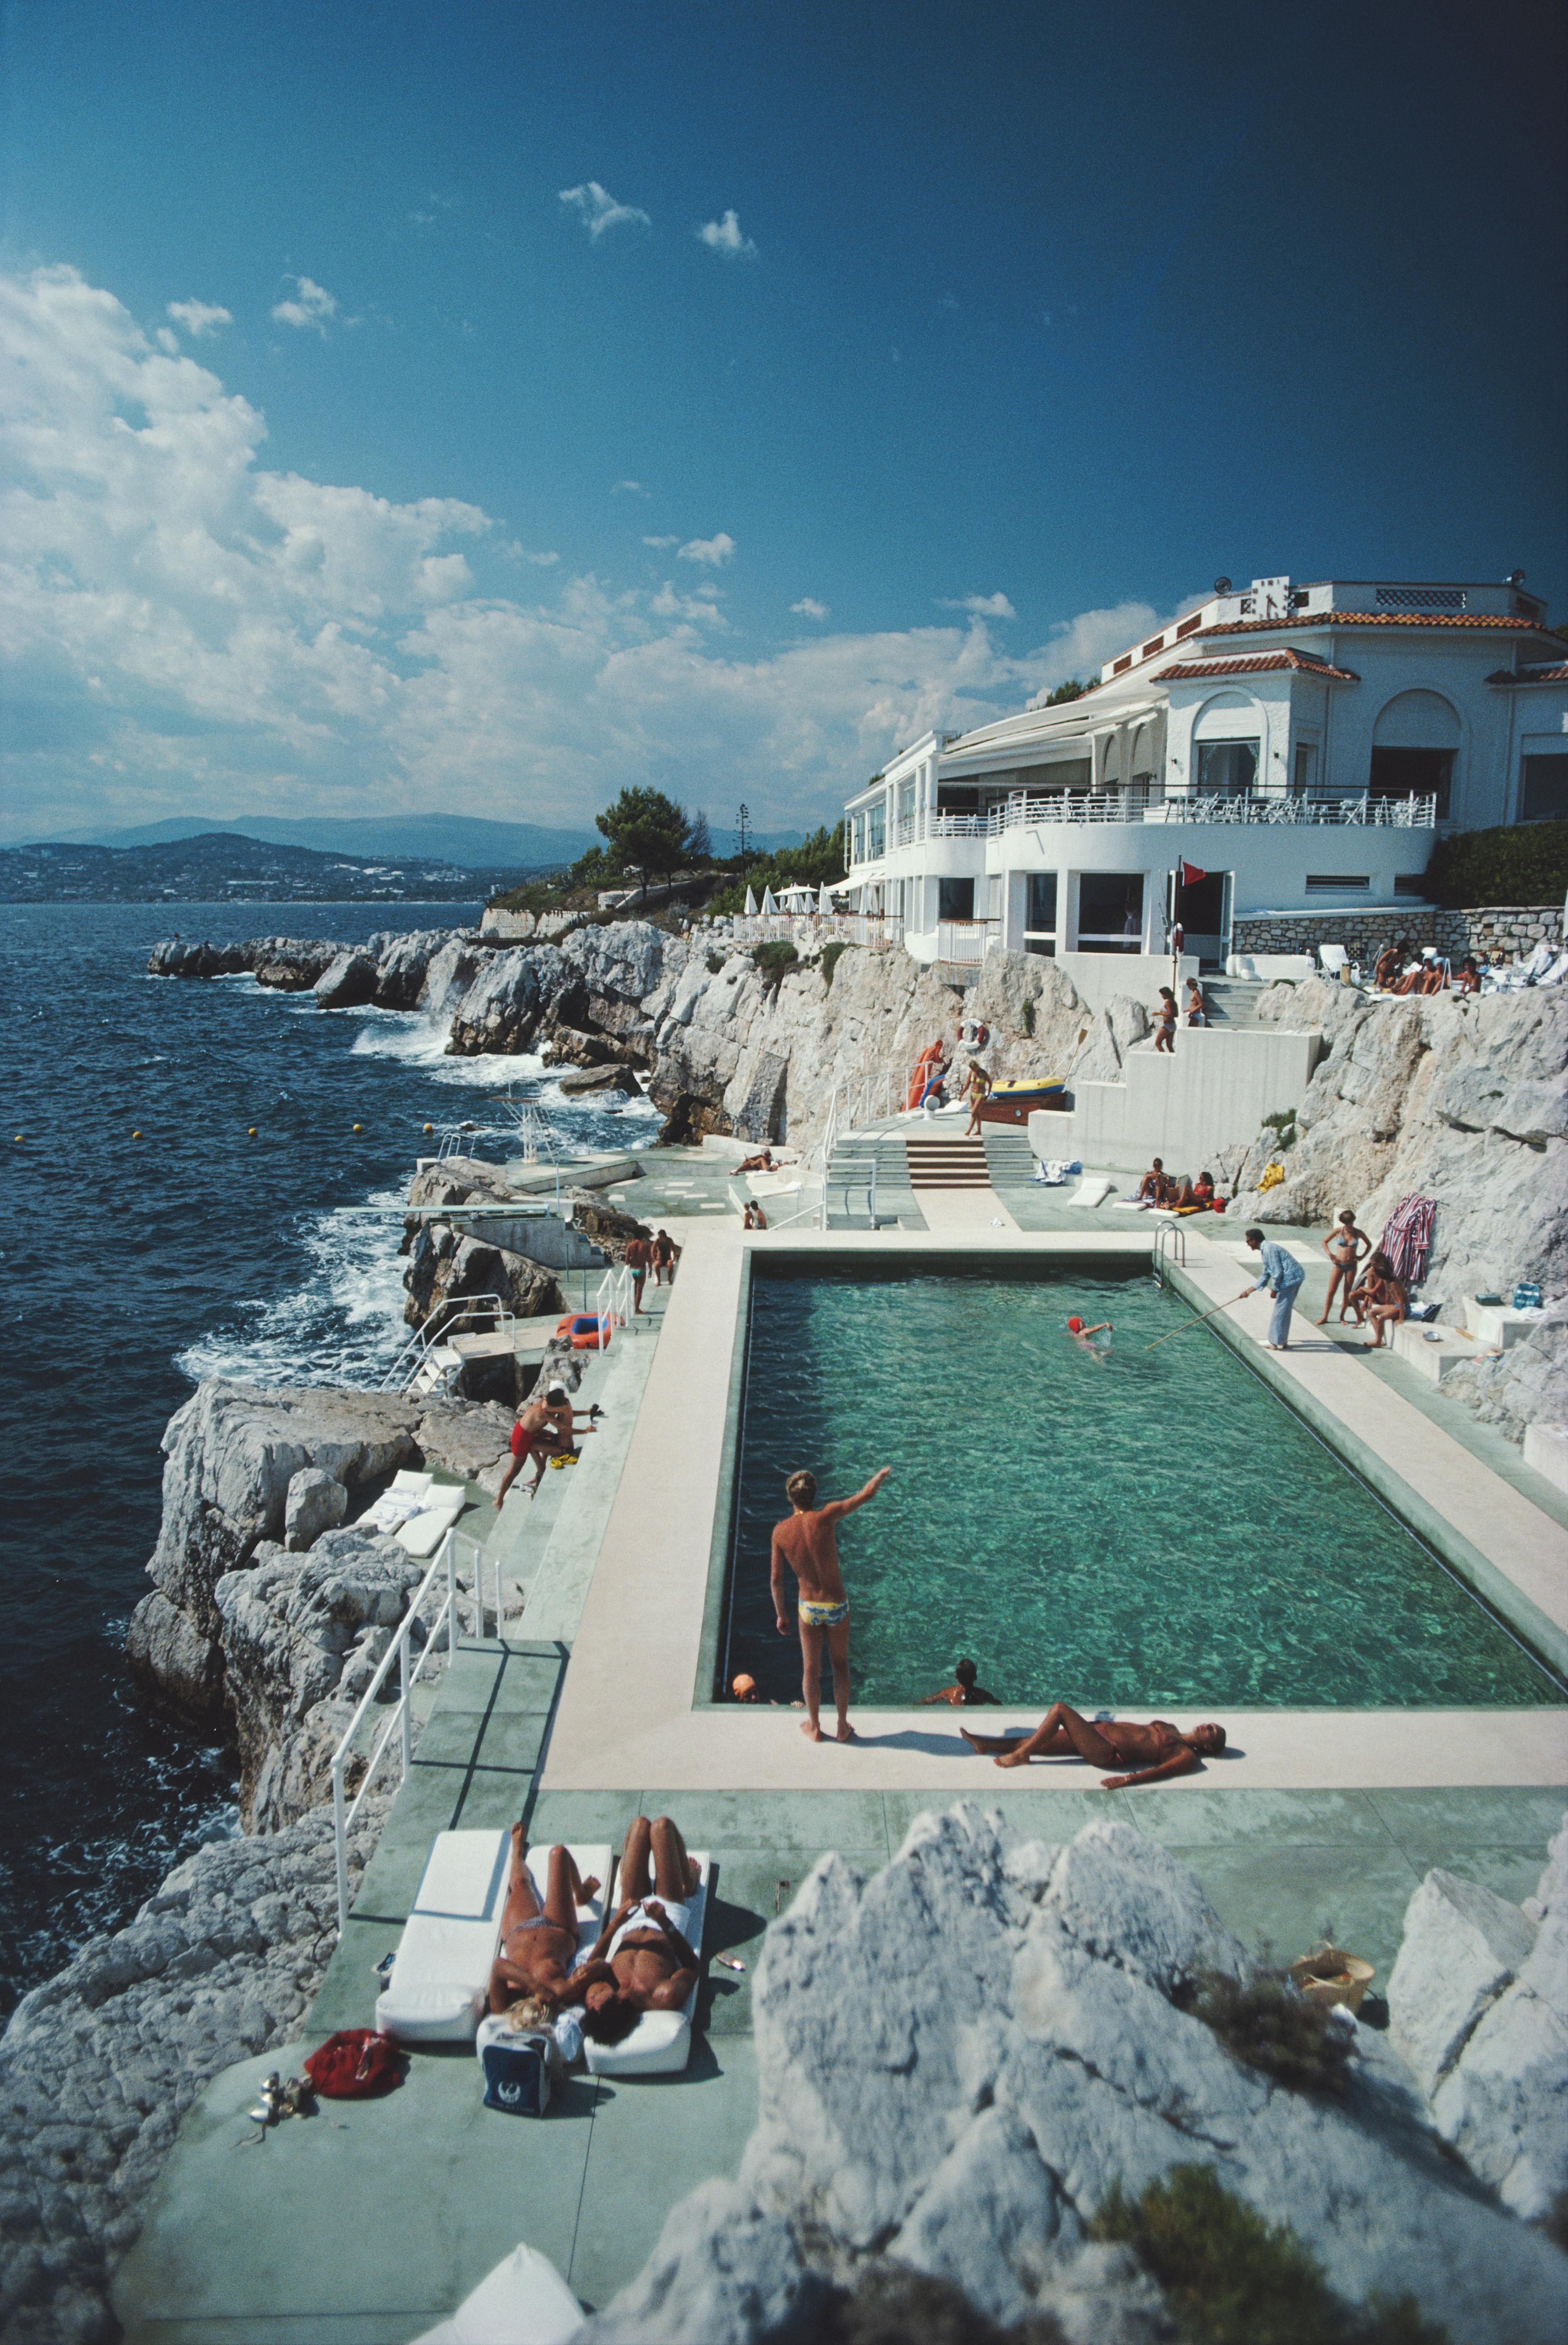 ‘Eden Roc Pool‘ from 1976, is one of the best known French Riviera photographs by American photographer Slim Aarons (1916-2006). It shows the 'Hotel du cap Eden Roc' in Antibes, France, thought to be F. Scott Fitzgerald’s inspiration for the “Hôtel